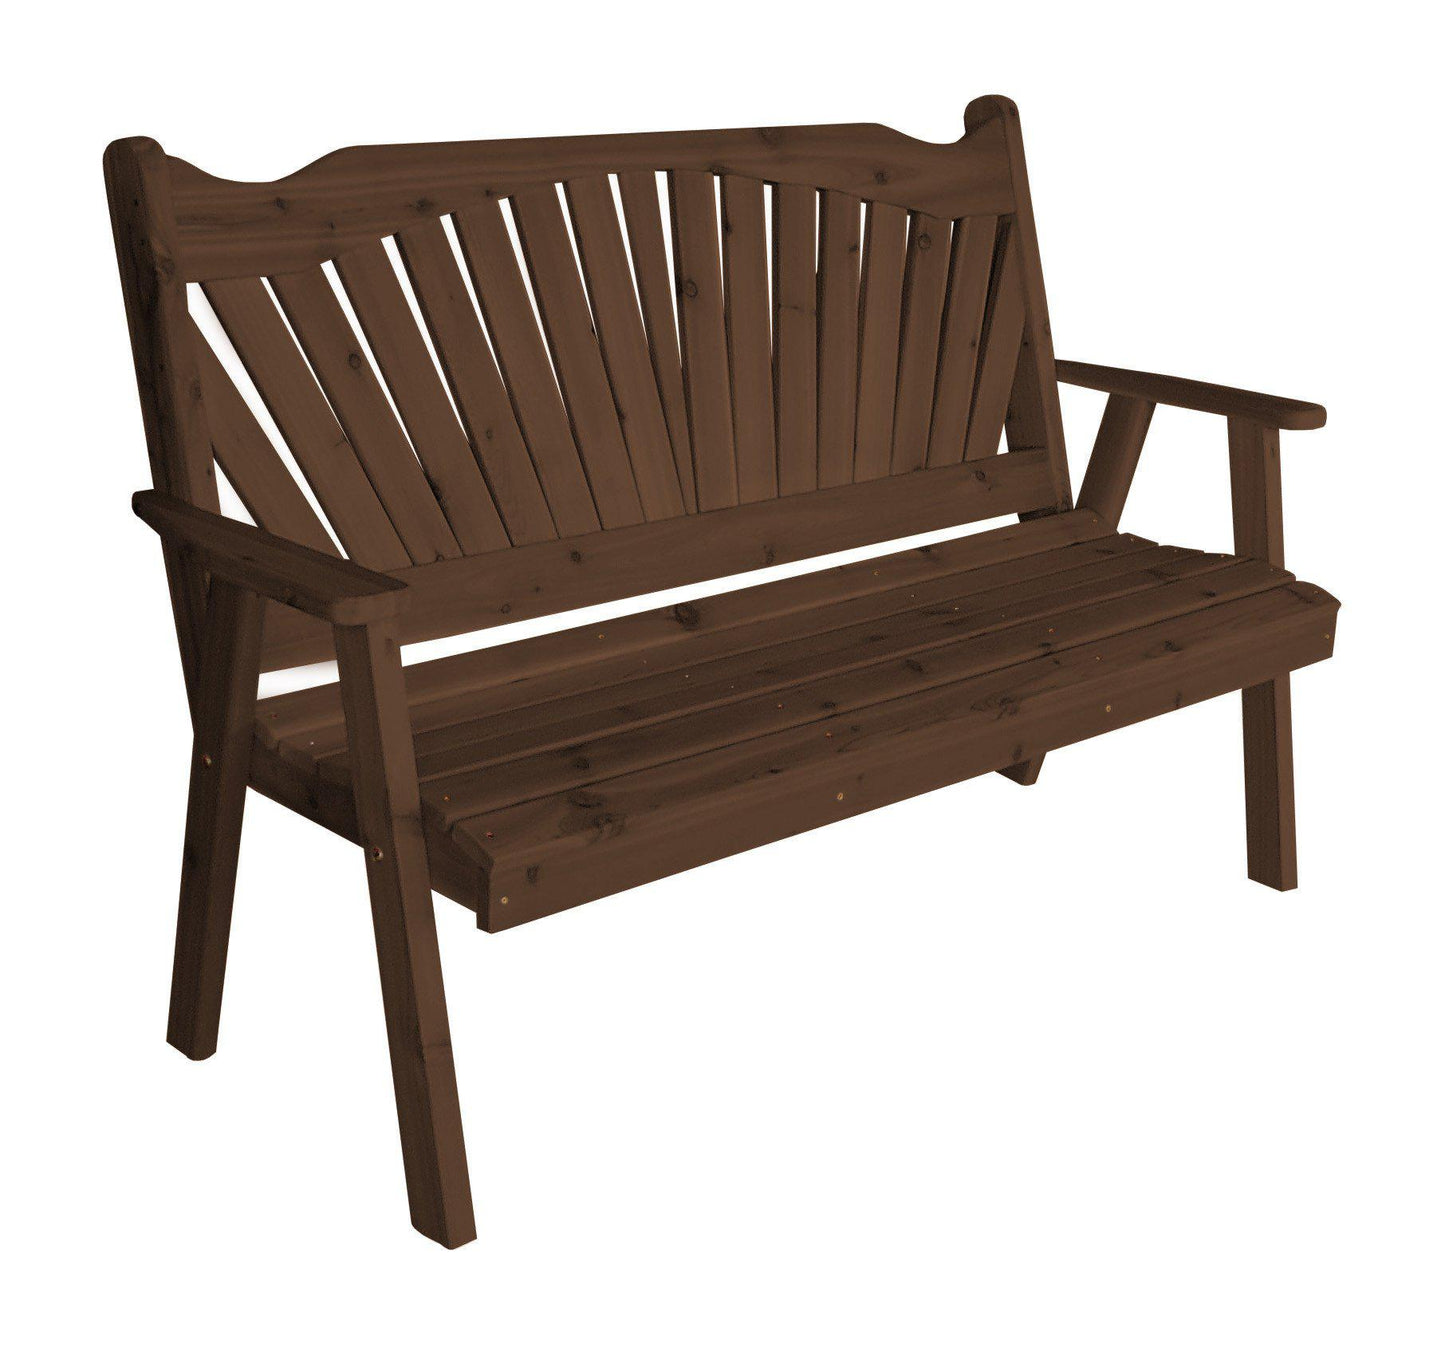 A&L Furniture Co. Western Red Cedar 5' Fanback Garden Bench - LEAD TIME TO SHIP 2 WEEKS